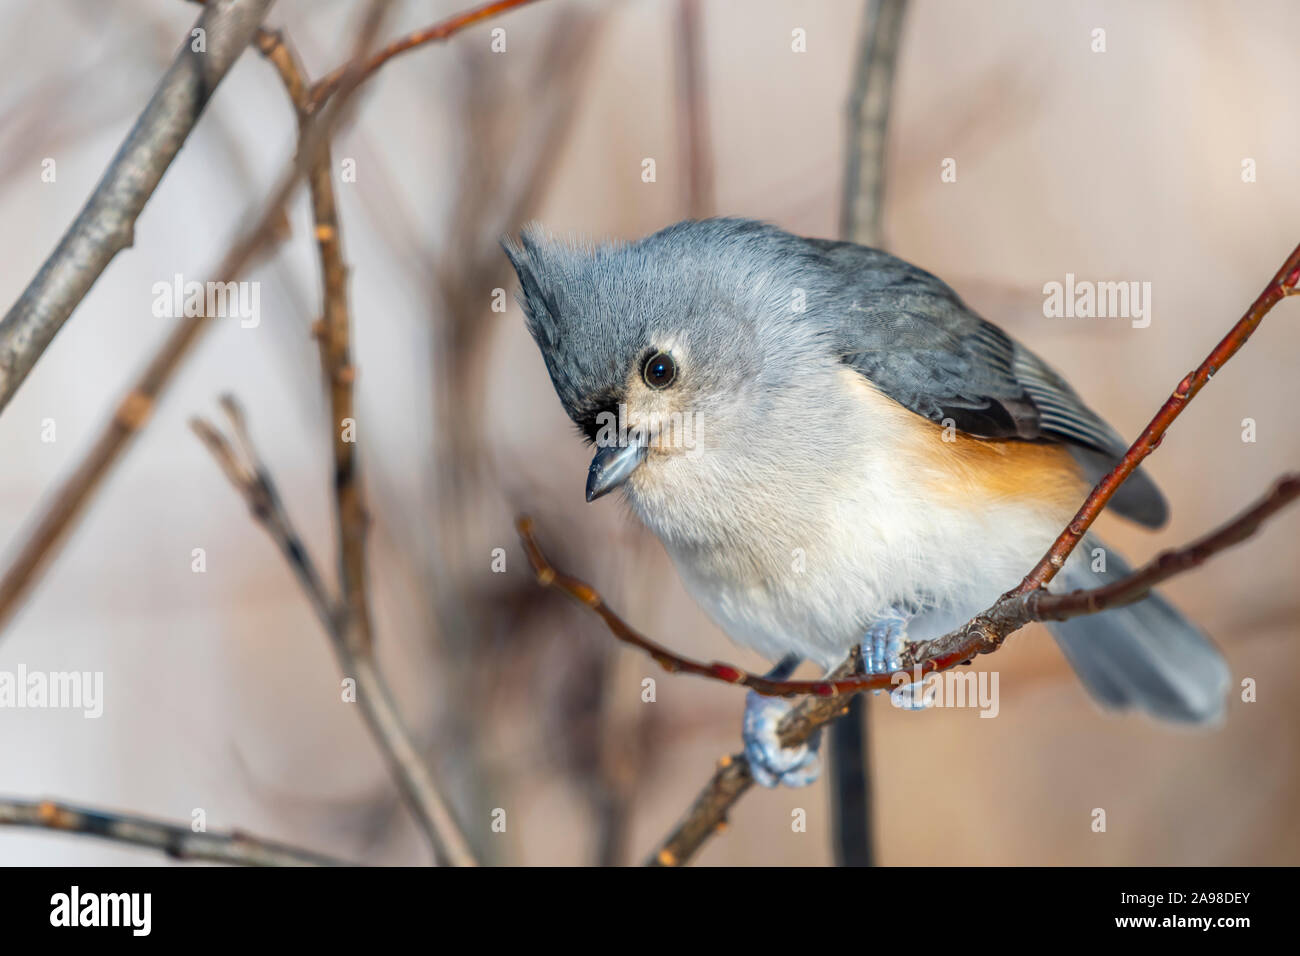 Tufted titmouse (Baeolophus bicolor) perched on a branch in winter. Stock Photo